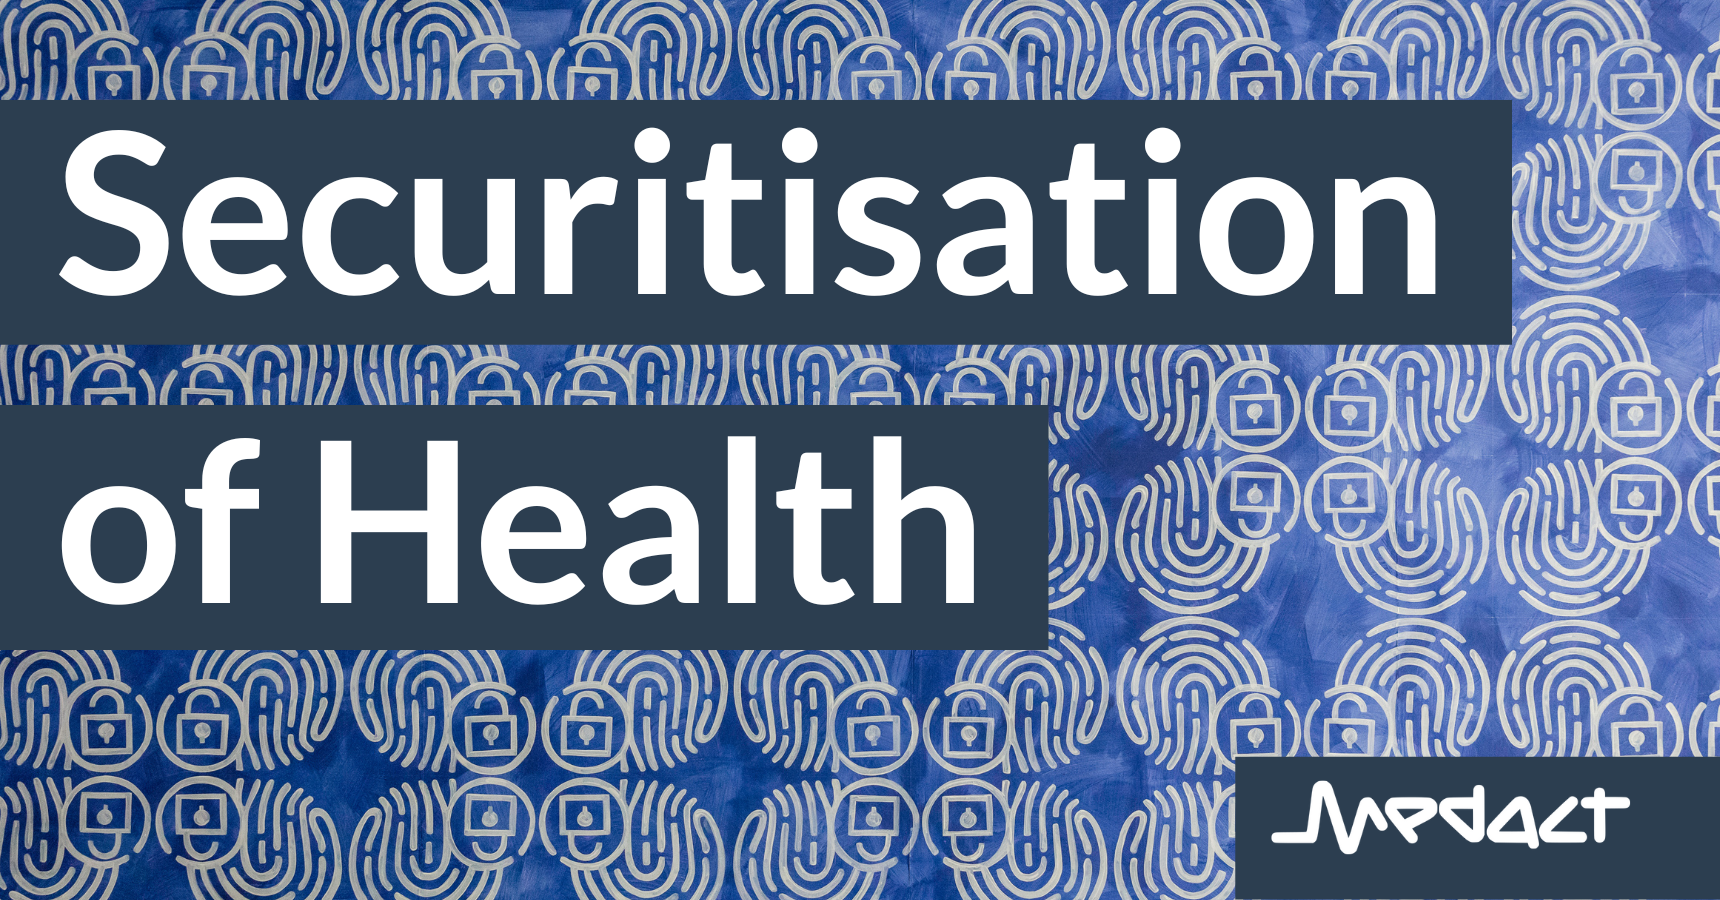 Securitisation of Health group meeting